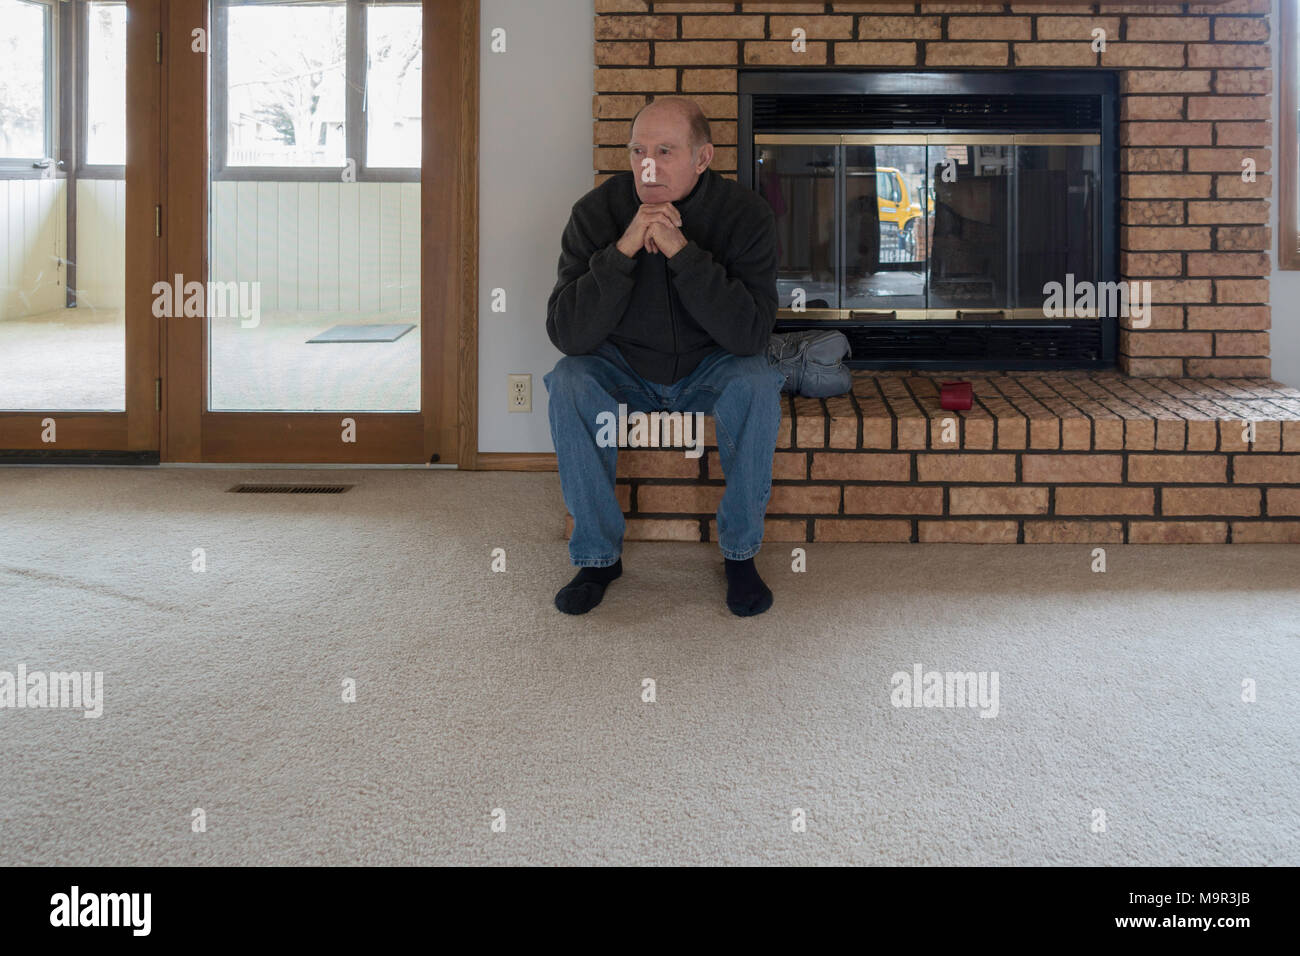 80 year old adult Caucasian man with dementia, showing sadness, observes his empty house while waiting for moving van. Wichita, Kansas, USA. Stock Photo